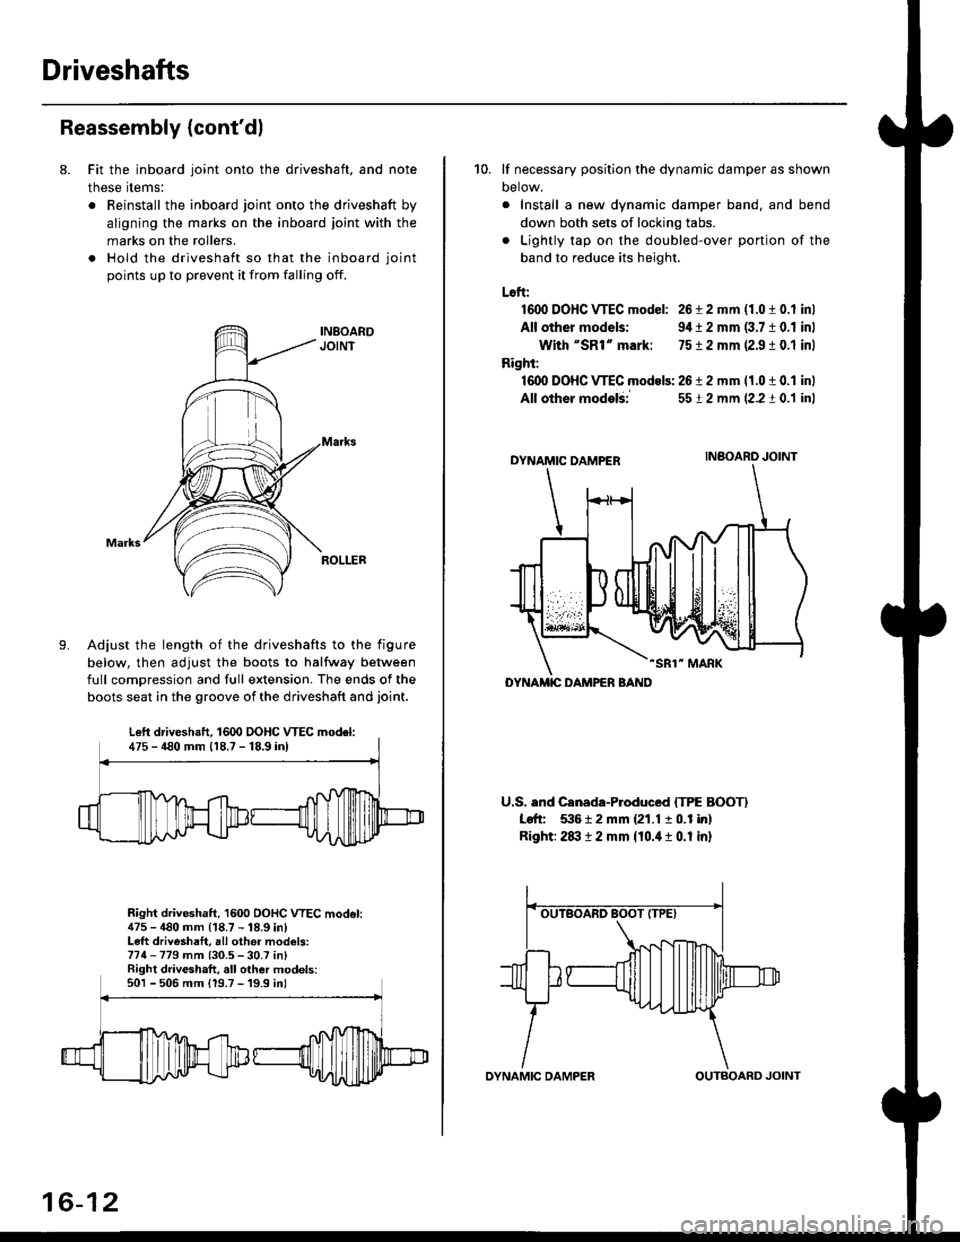 HONDA CIVIC 1996 6.G Workshop Manual Driveshafts
Reassembly (contdl
8. Fit the inboard joint onto the driveshaft, and note
these items:
. Reinstall the inboard joint onto the driveshaft by
aligning the marks on the inboard joint with th